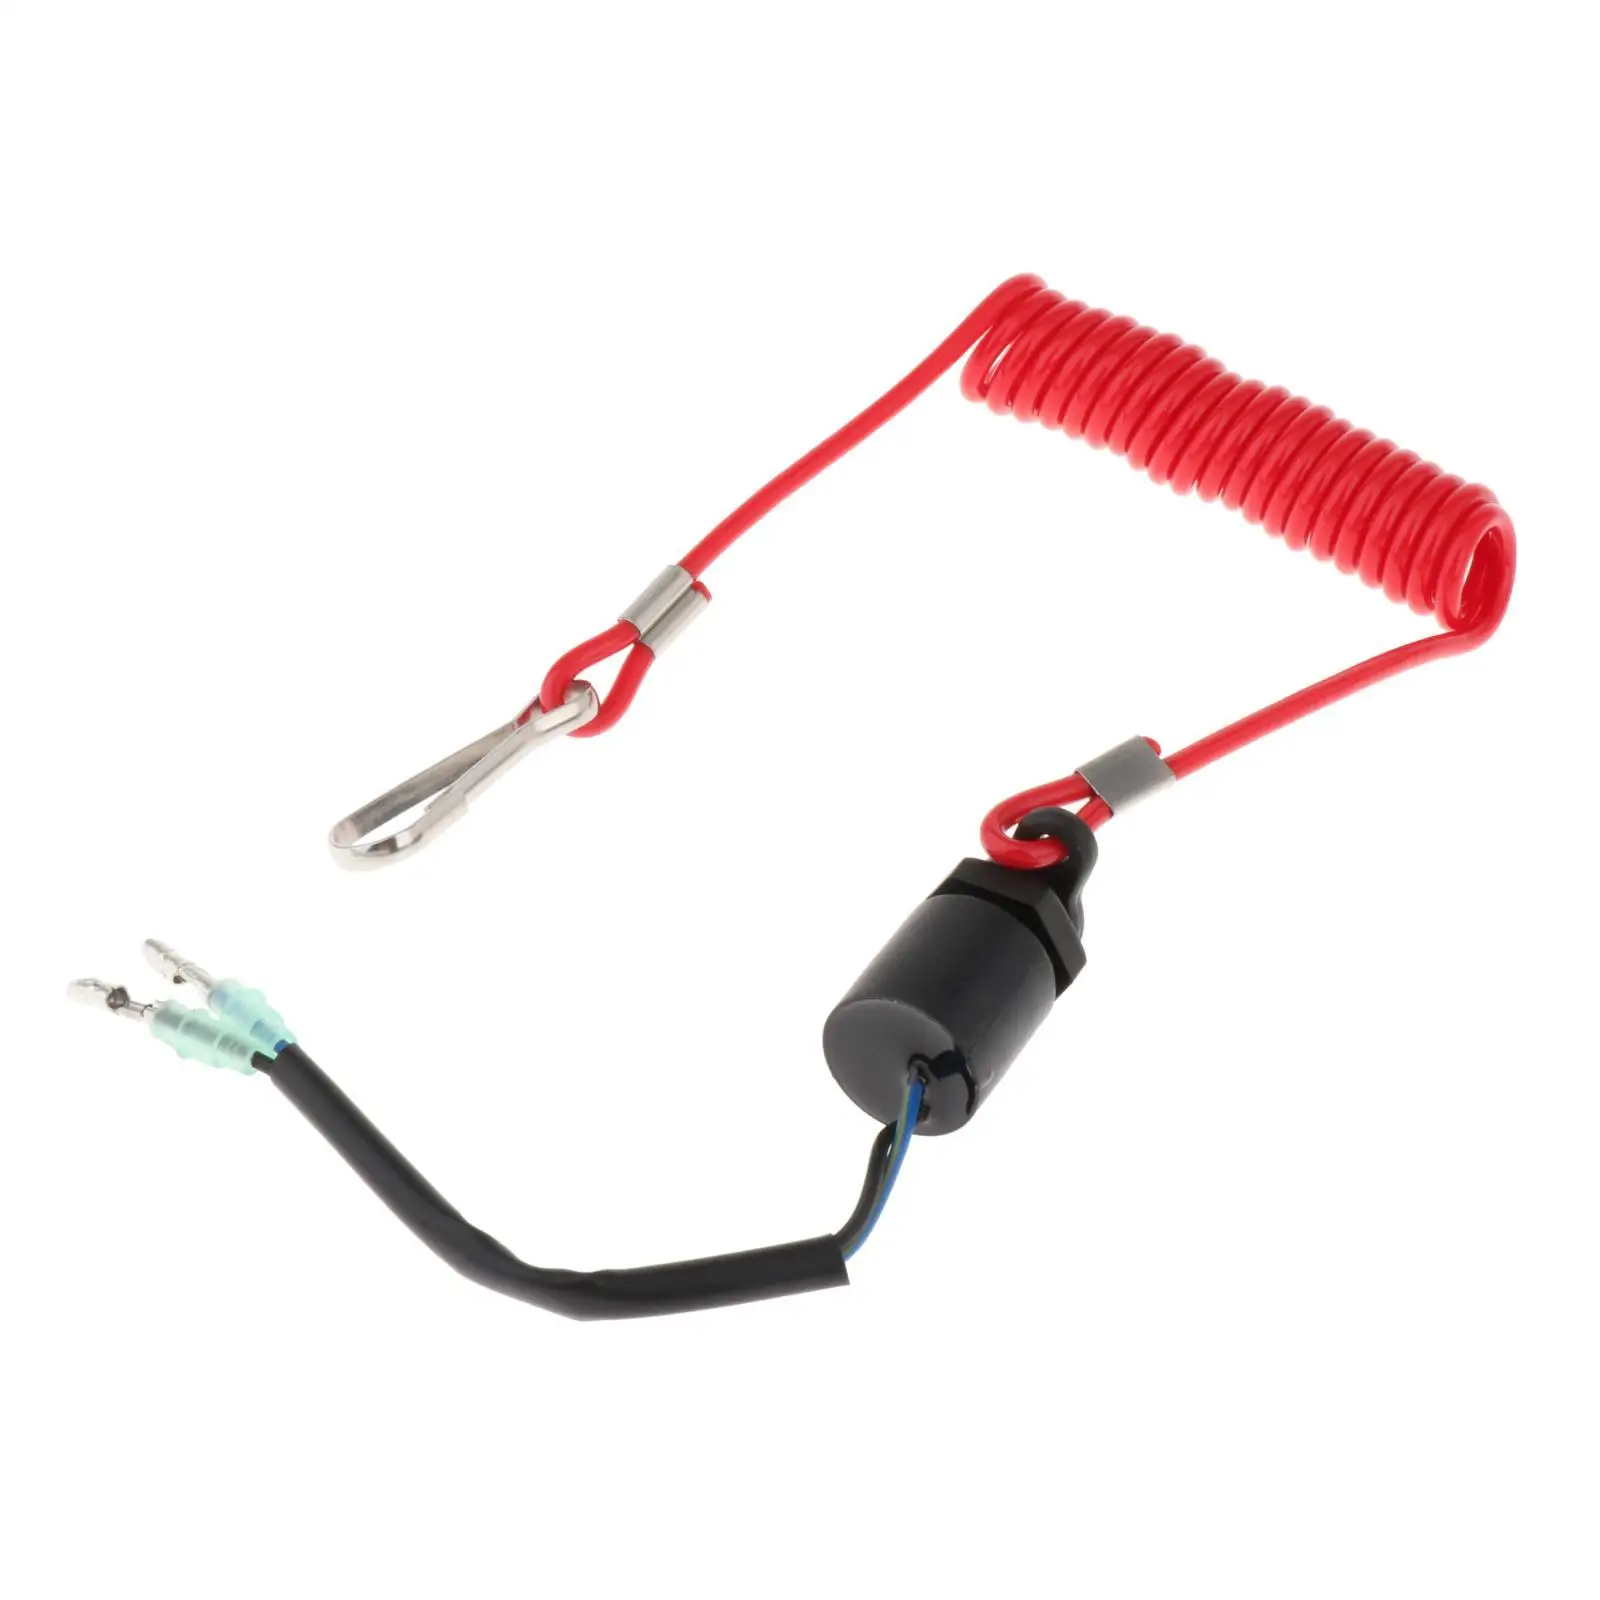 Boat Outboard Switch 37820-92E03 Stop Kill Safety Lanyard Boat Kill Switch with Lanyard for Suzuki DT DF 4HP-100HP